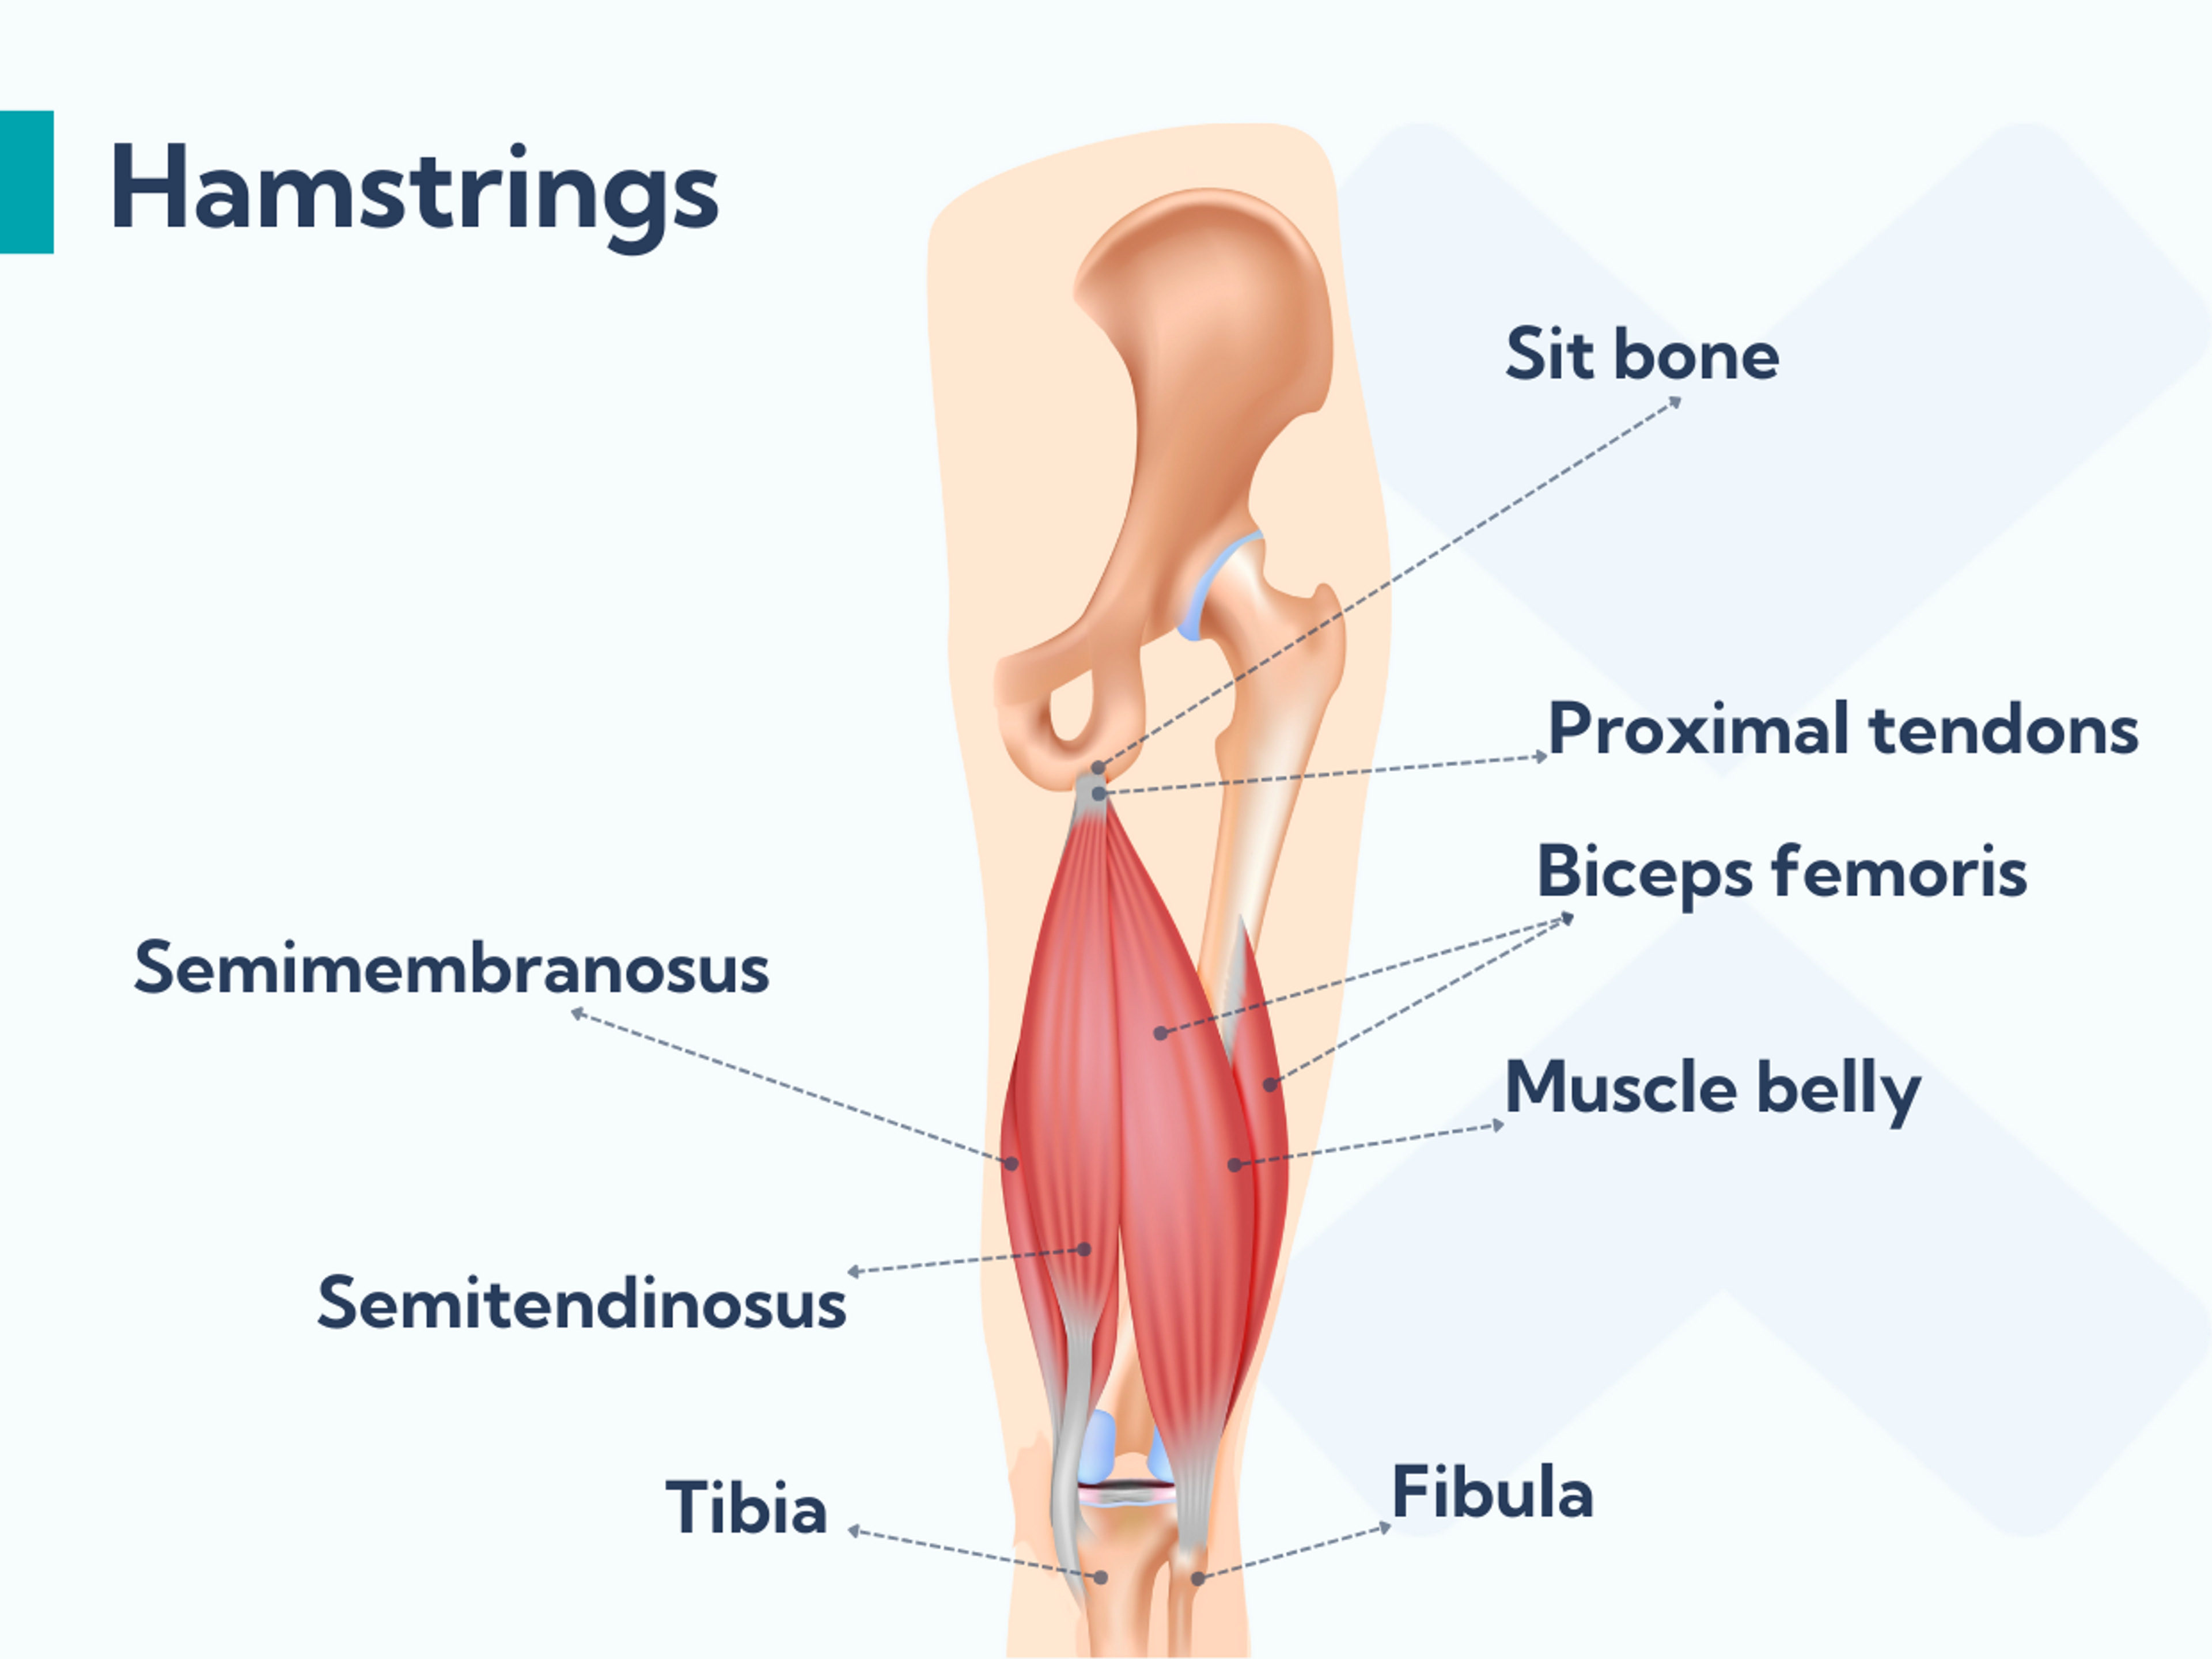 Anatomy of the hamstring muscles